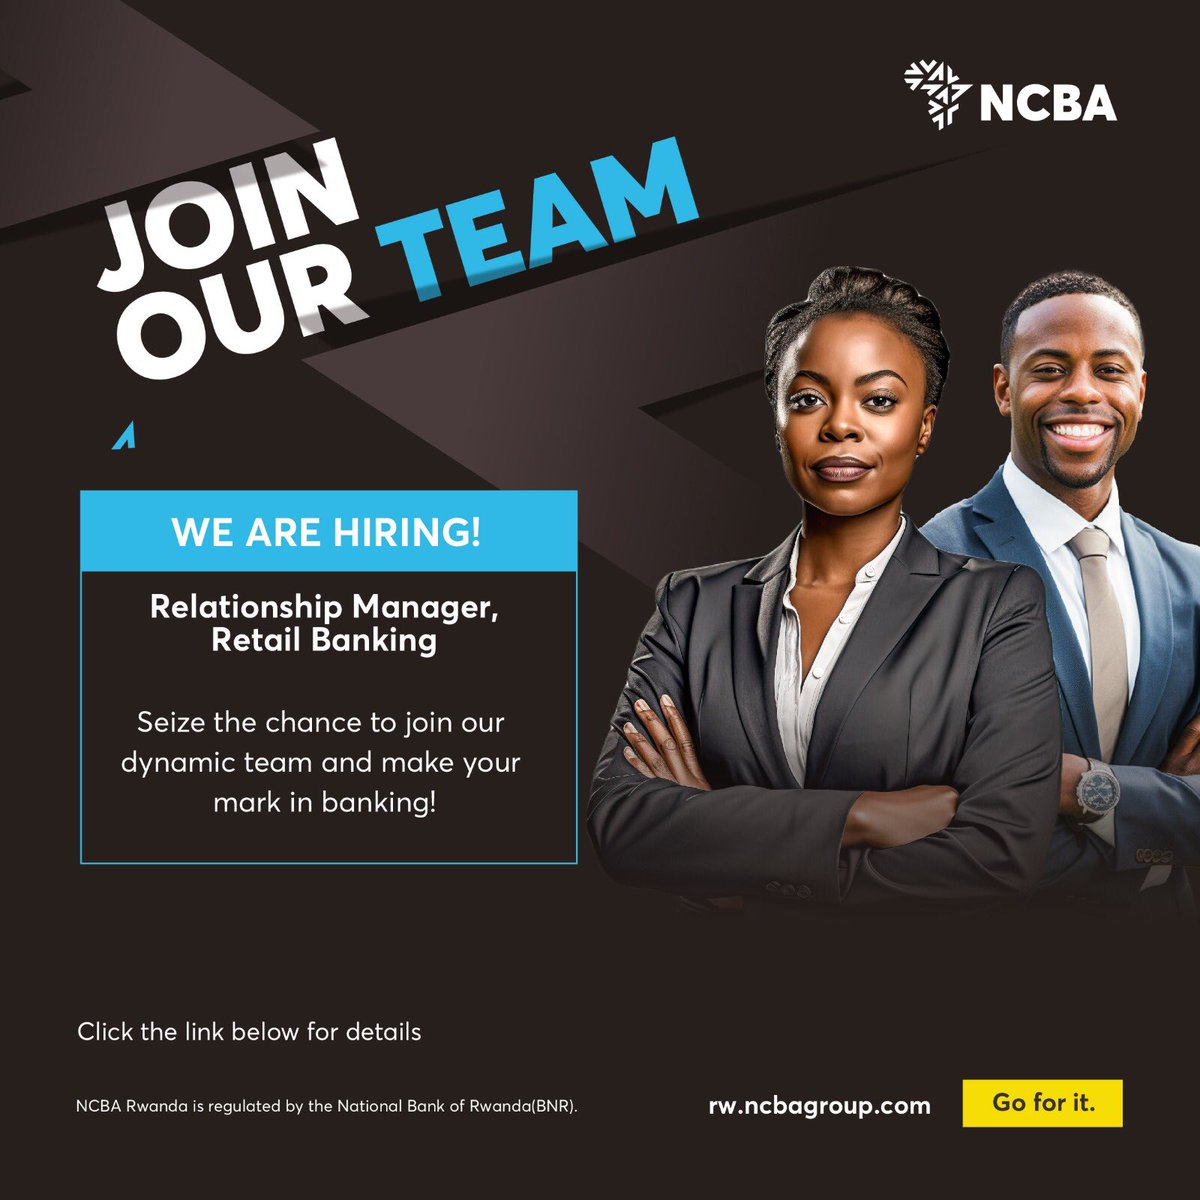 Seize the chance to become a valuable member of our incredible team and make a lasting impact in the world of banking! #JoinOurTeam 

Apply here: rw.ncbagroup.com/job-openings/